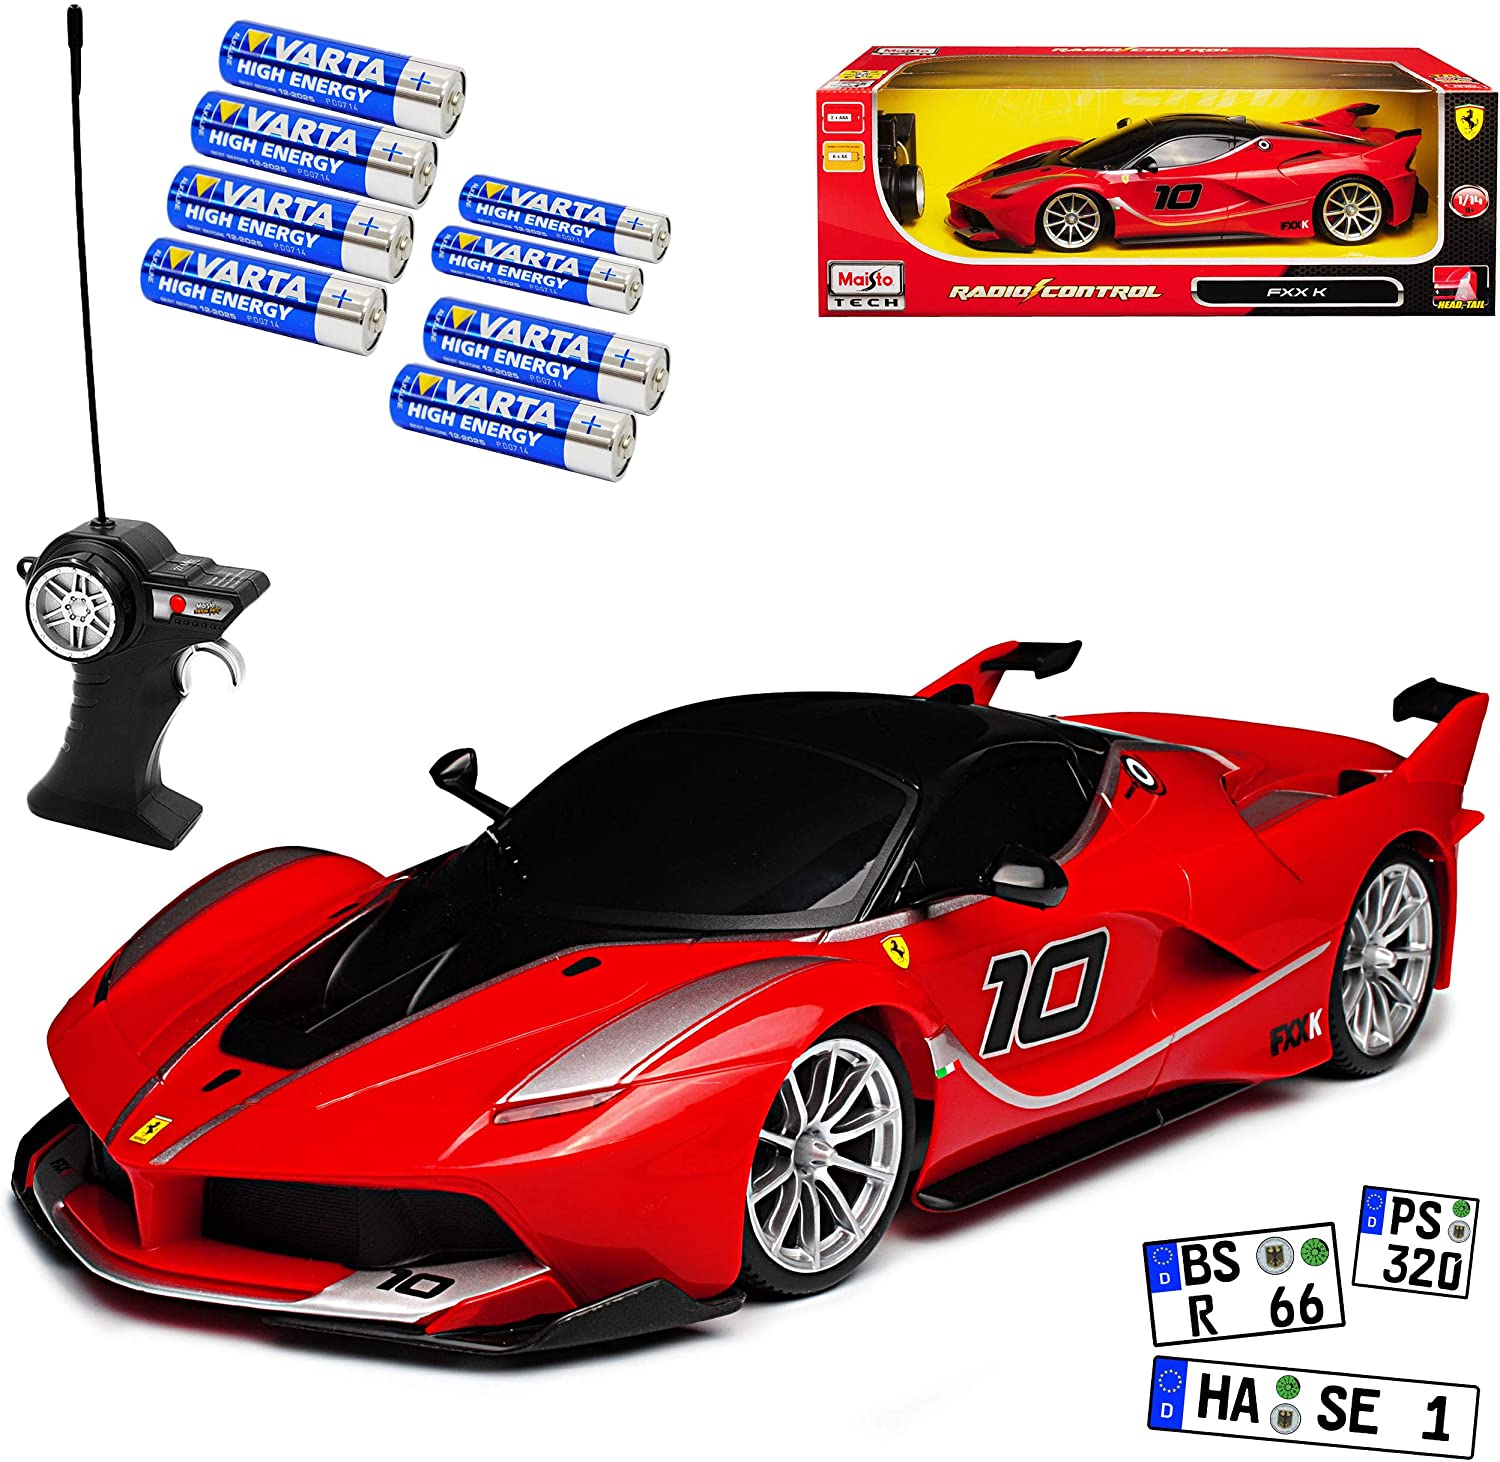 Maisto Ferrari Fxx K Red 27 Mhz Rc Radio Car-Batteries Included-Ready To St